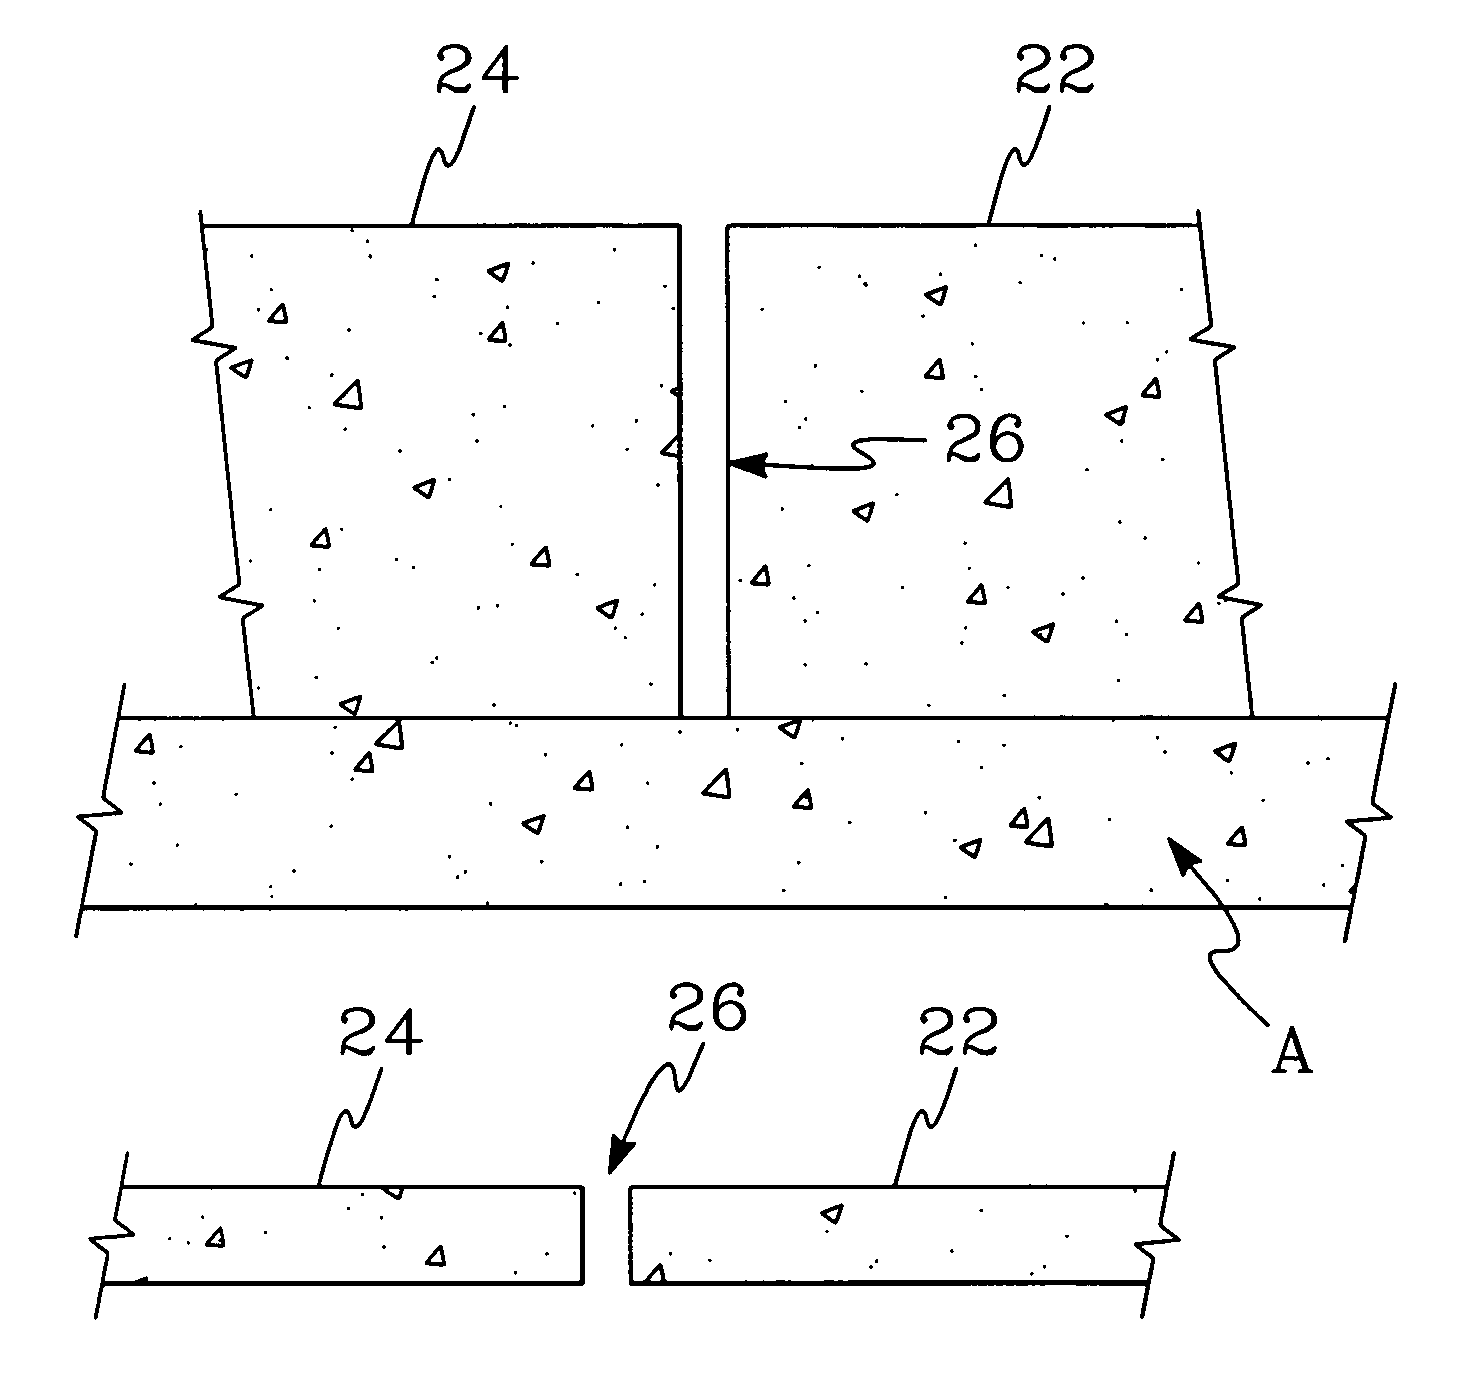 Flume for a filter system including at least one filter having a filter bed that is periodically washed with liquid, gas or a combination thereof